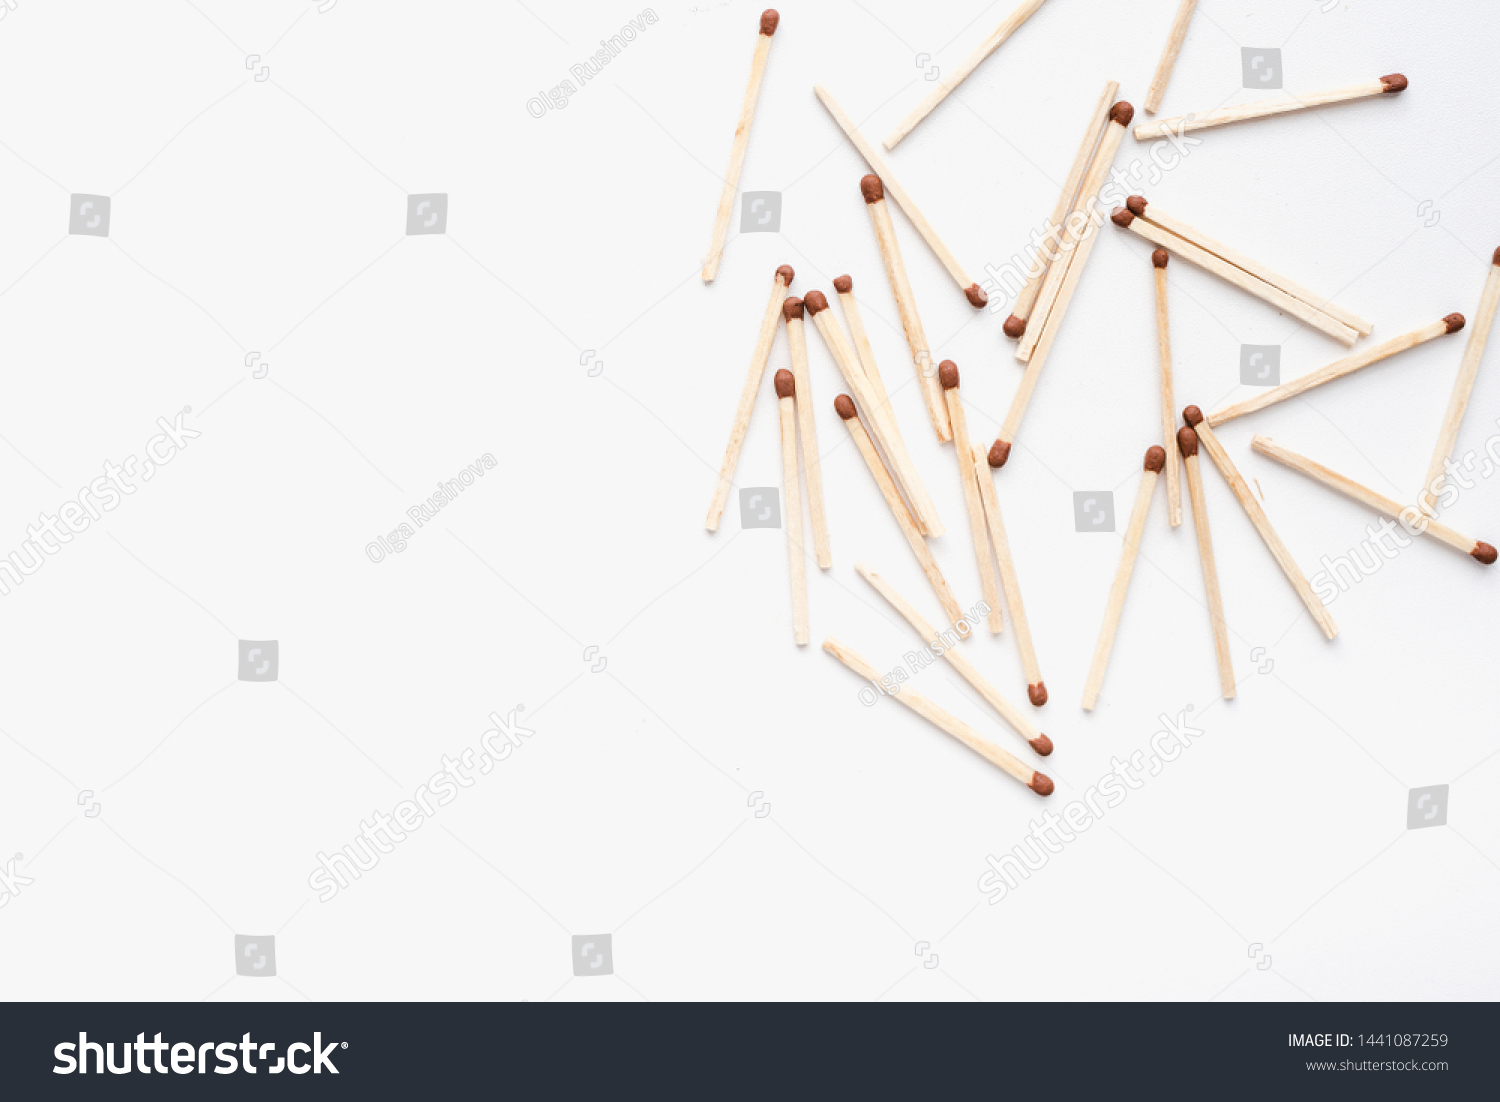 matches, matches on a white background #1441087259